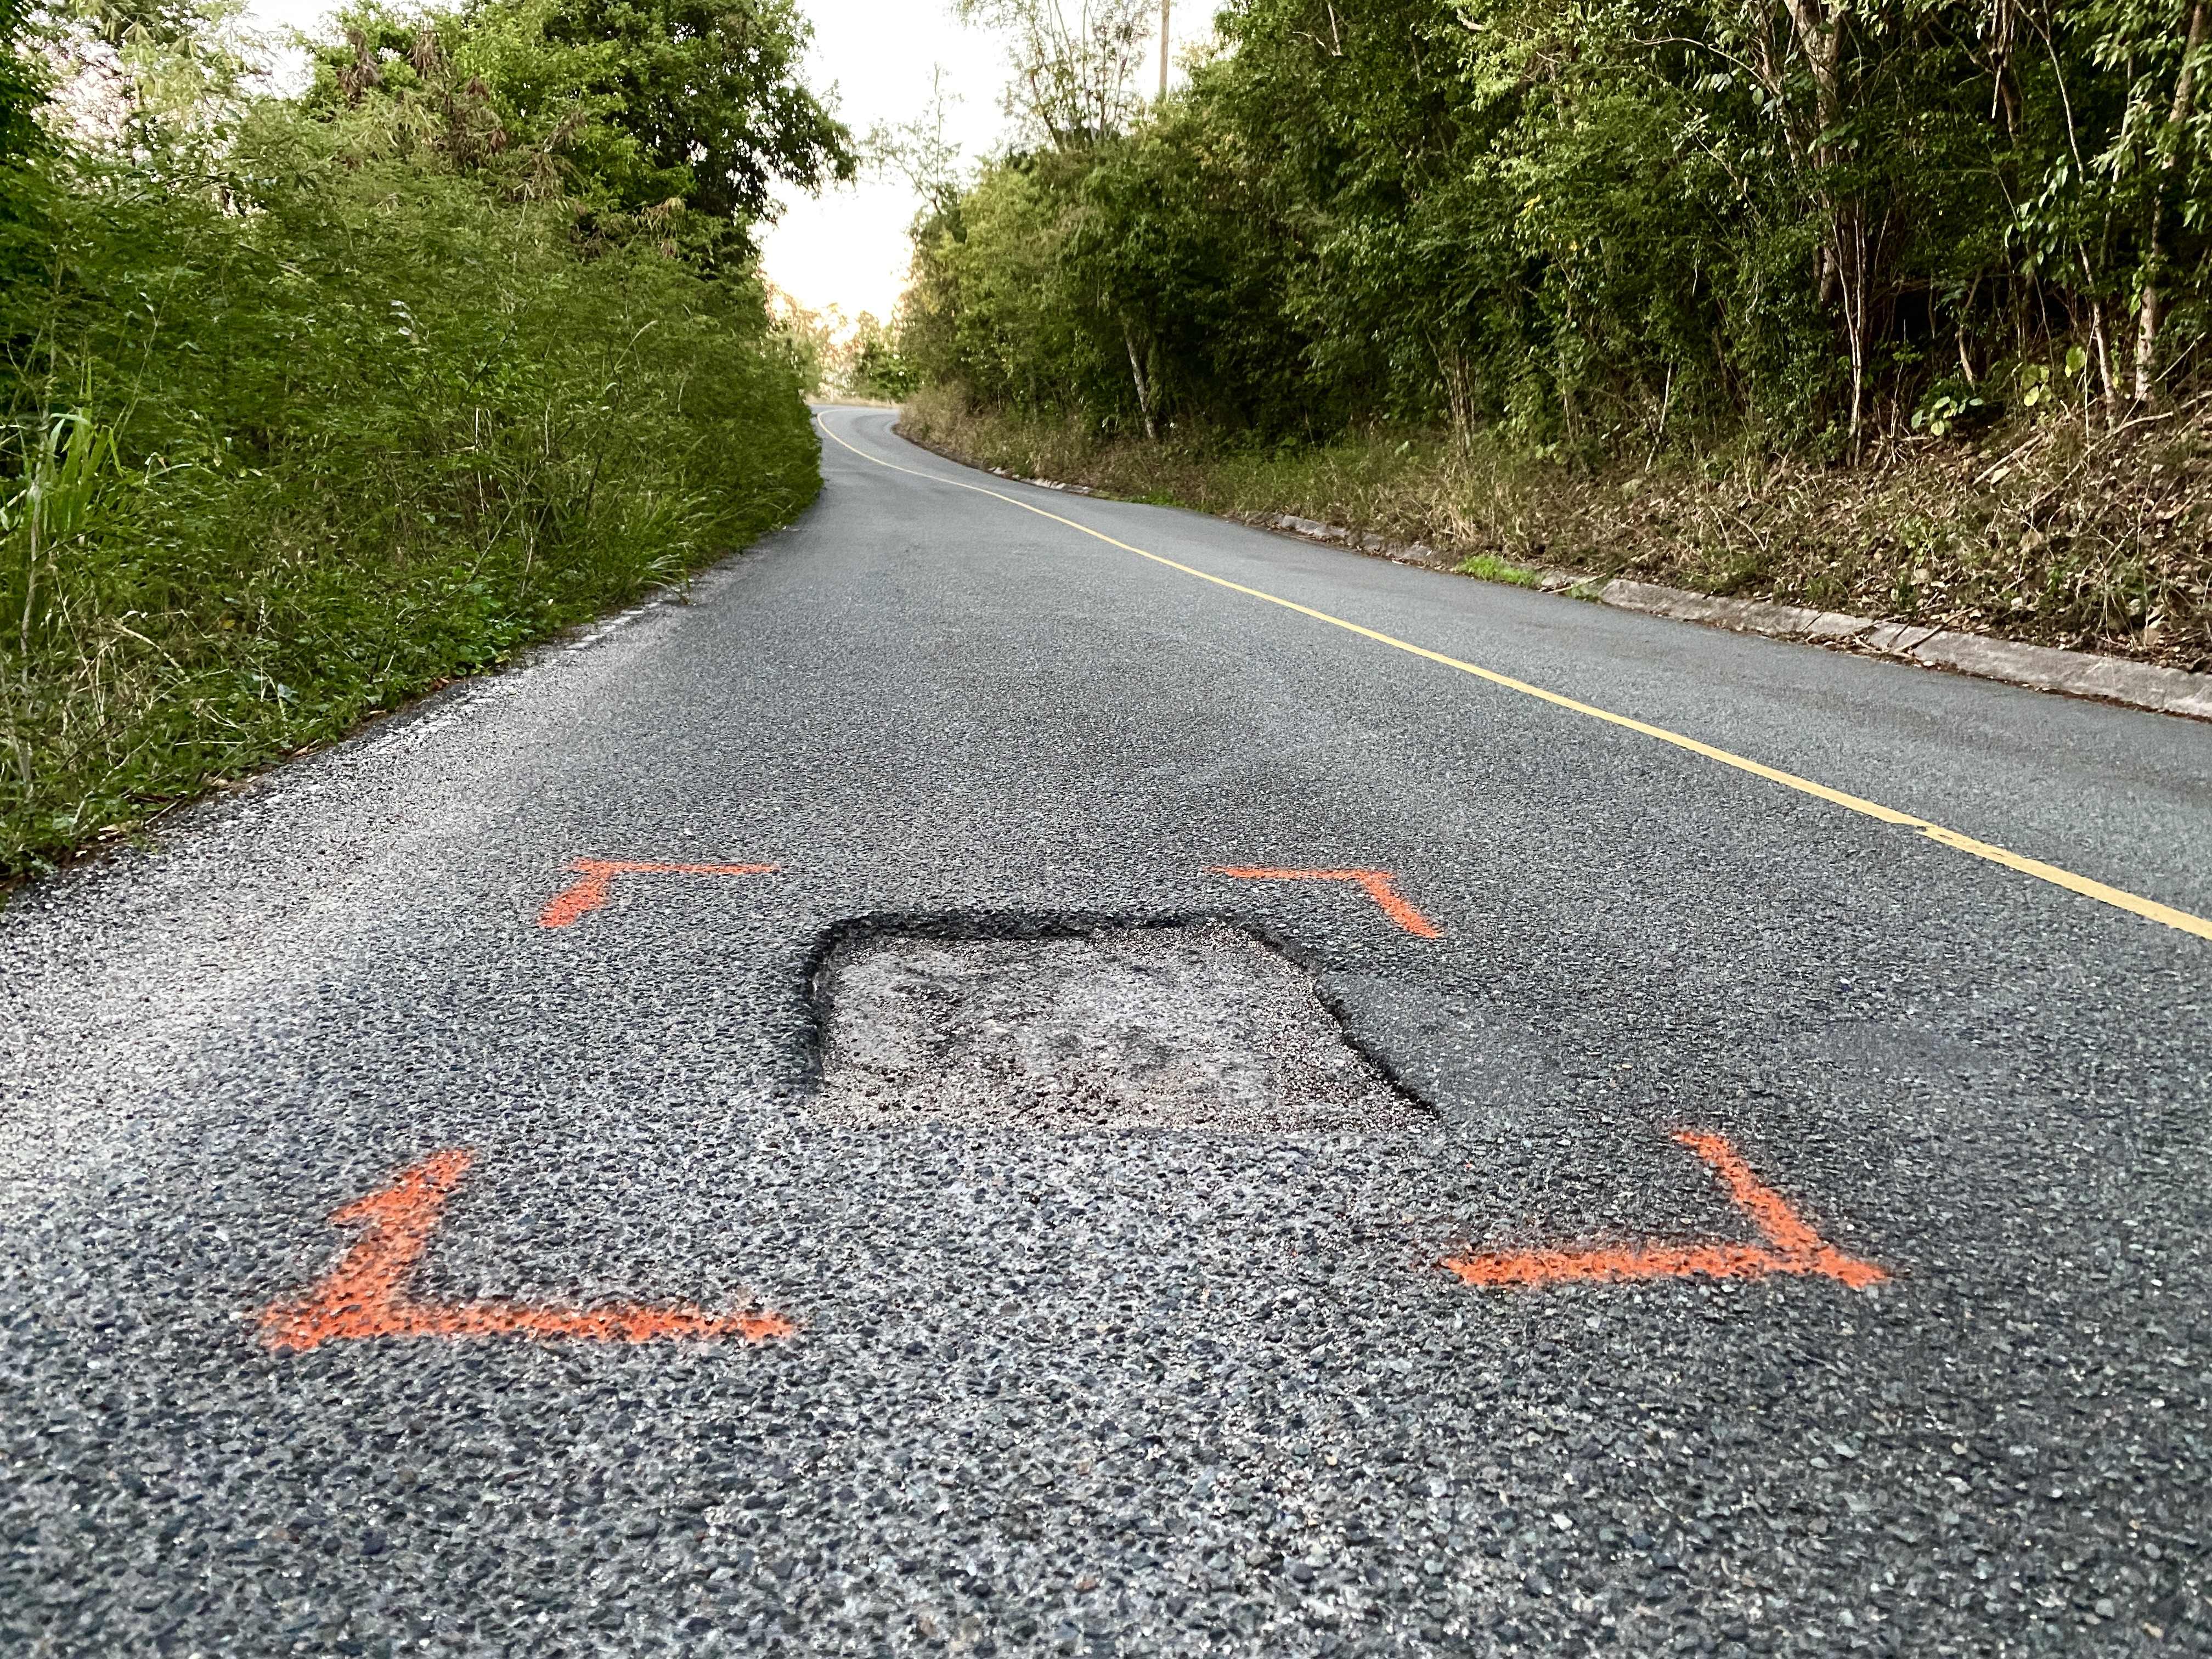 Damage to be repaired is marked on pavement